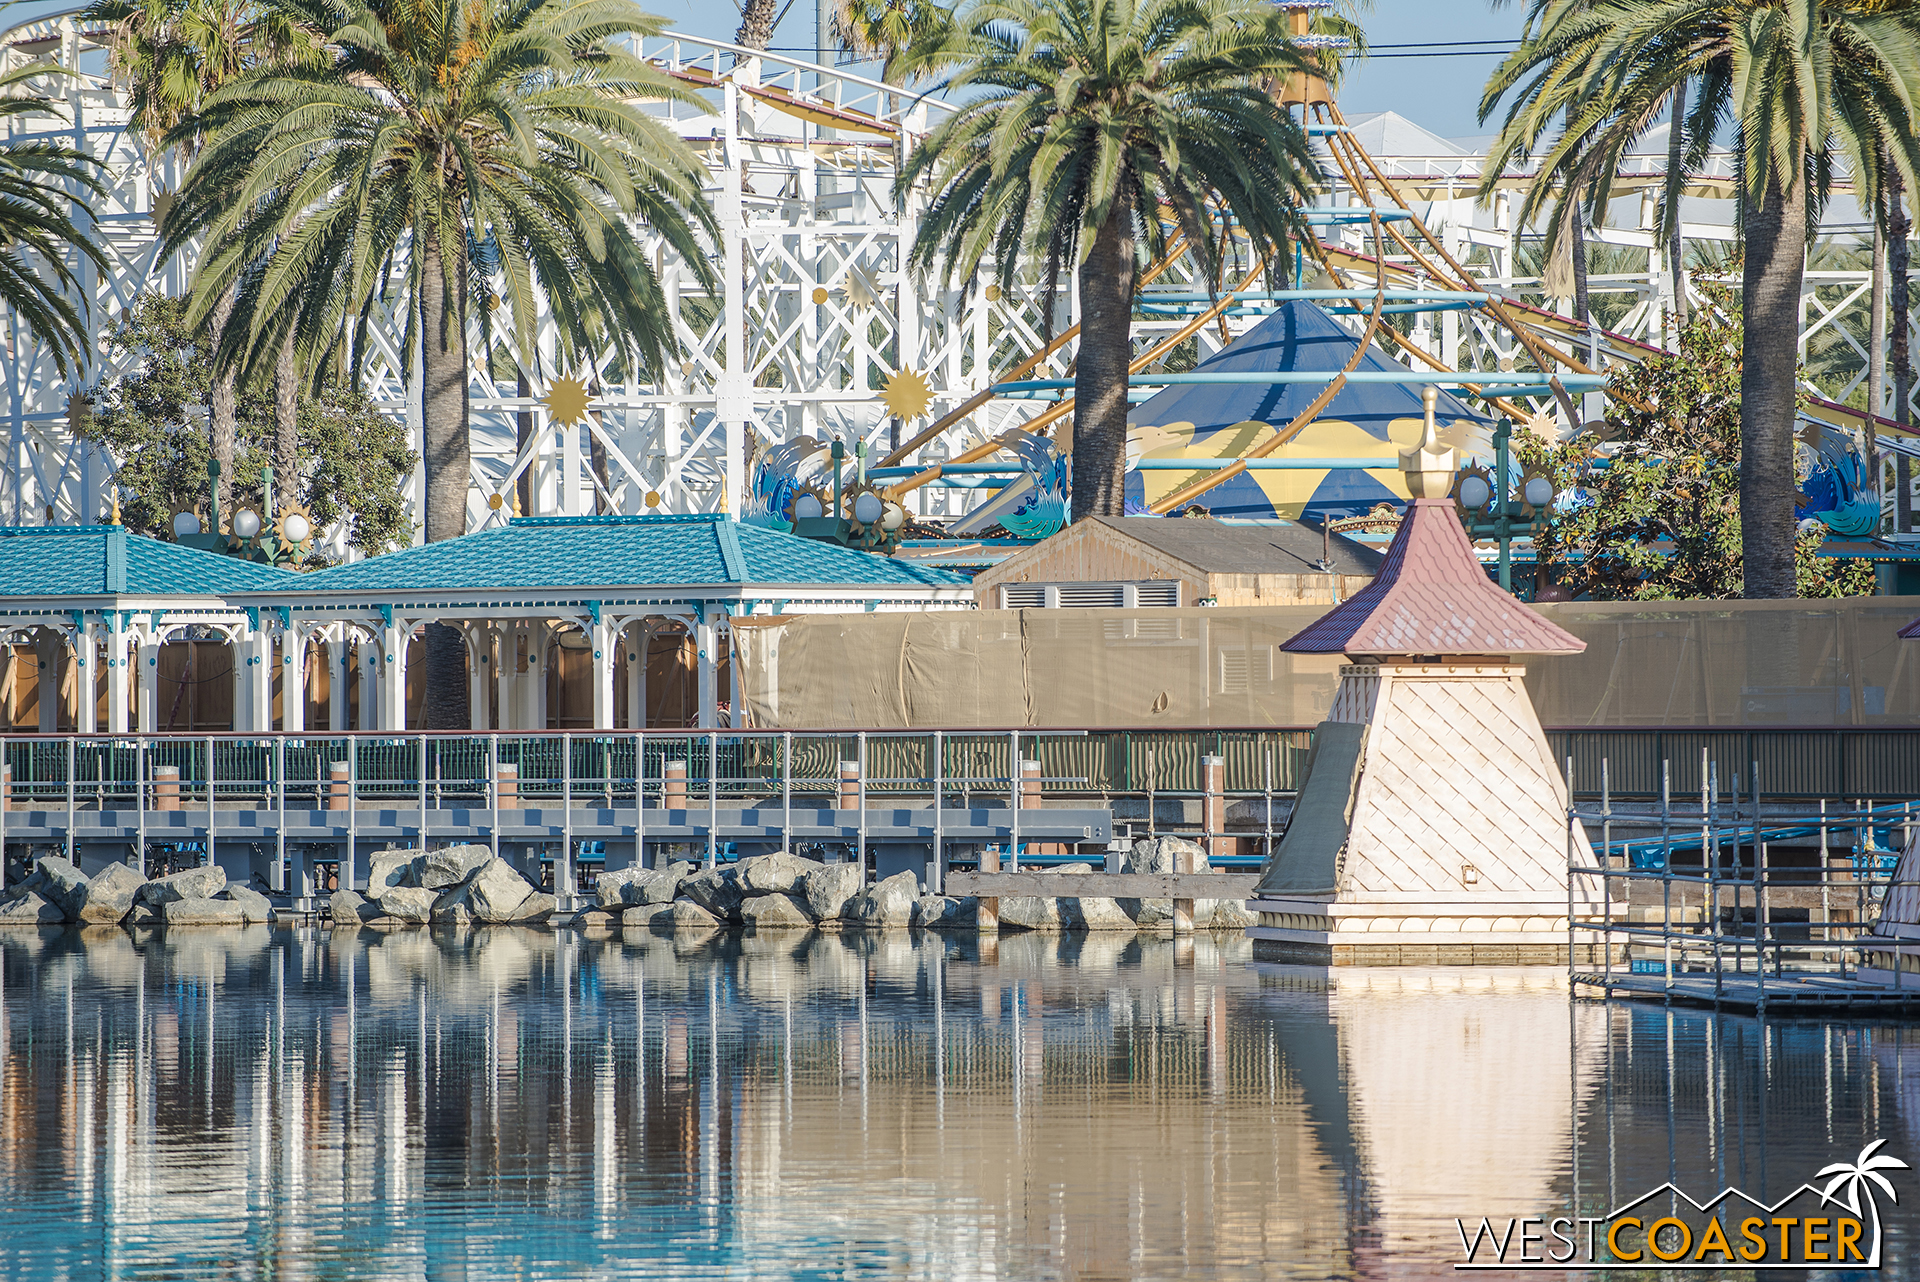  In other news, apparently, word on the street is that the California Screamin’ LIM (linear induction motor) launch has been swapped out into a LSM (linear synchronous motor) launch! 